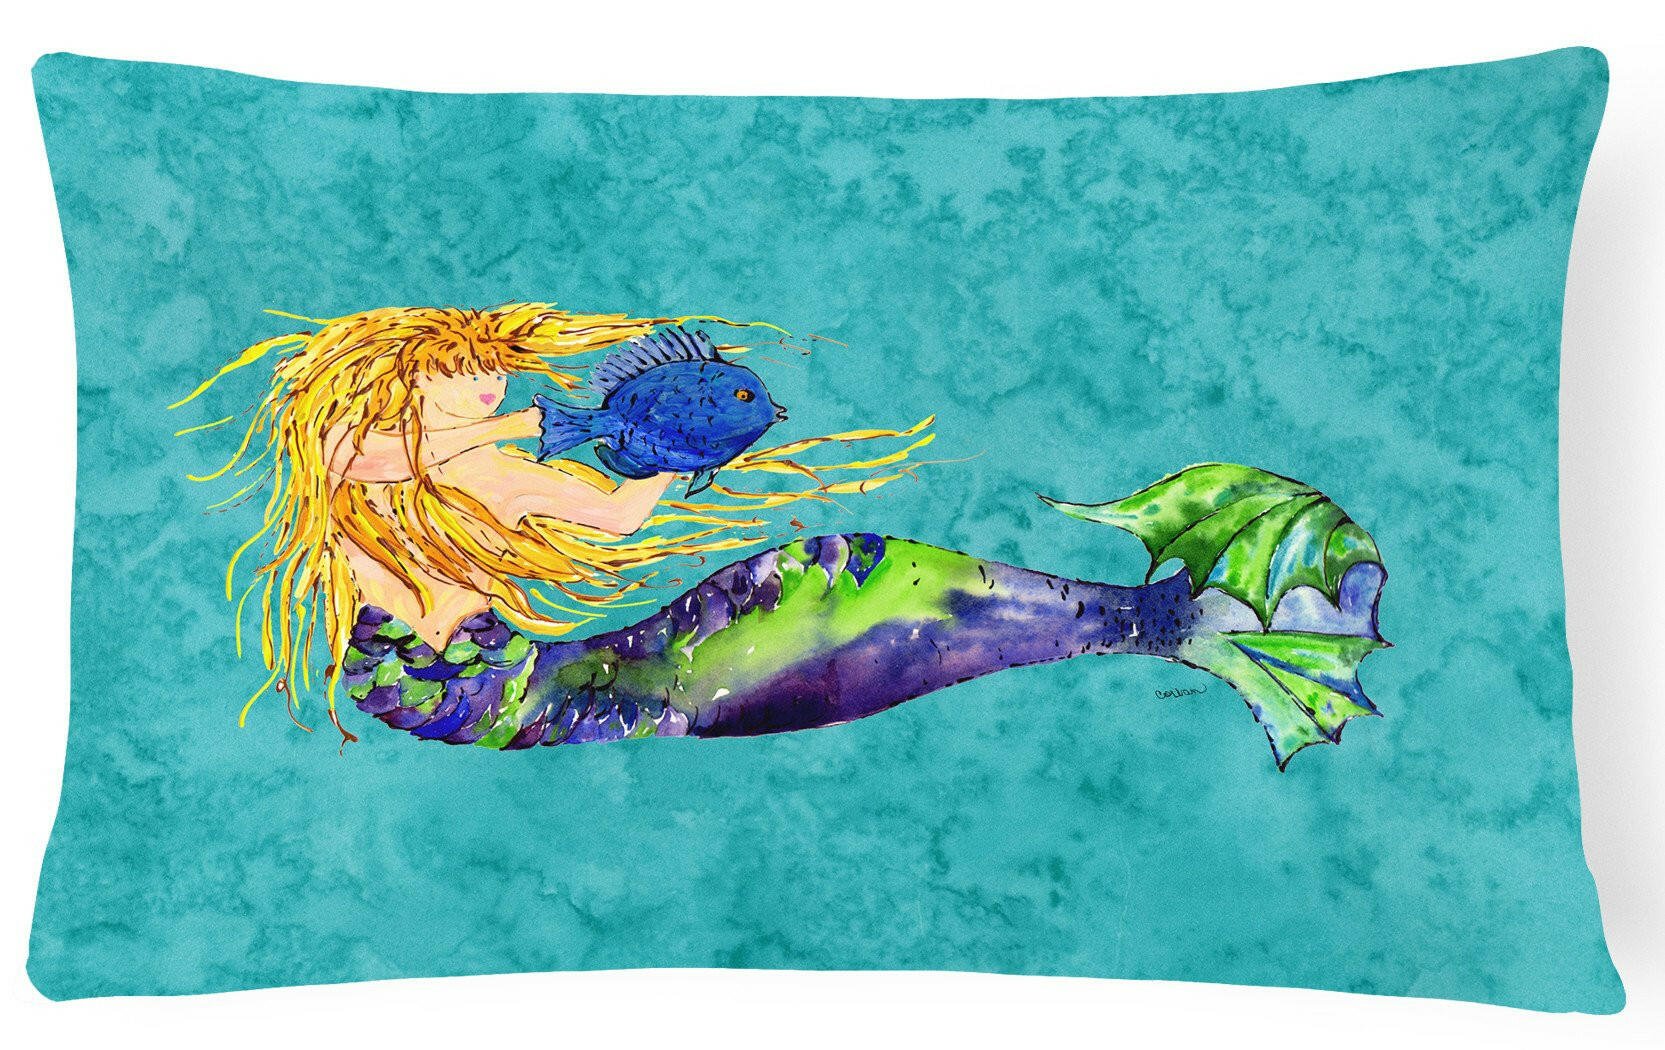 Blonde Mermaid on Teal Canvas Fabric Decorative Pillow 8724PW1216 by Caroline's Treasures